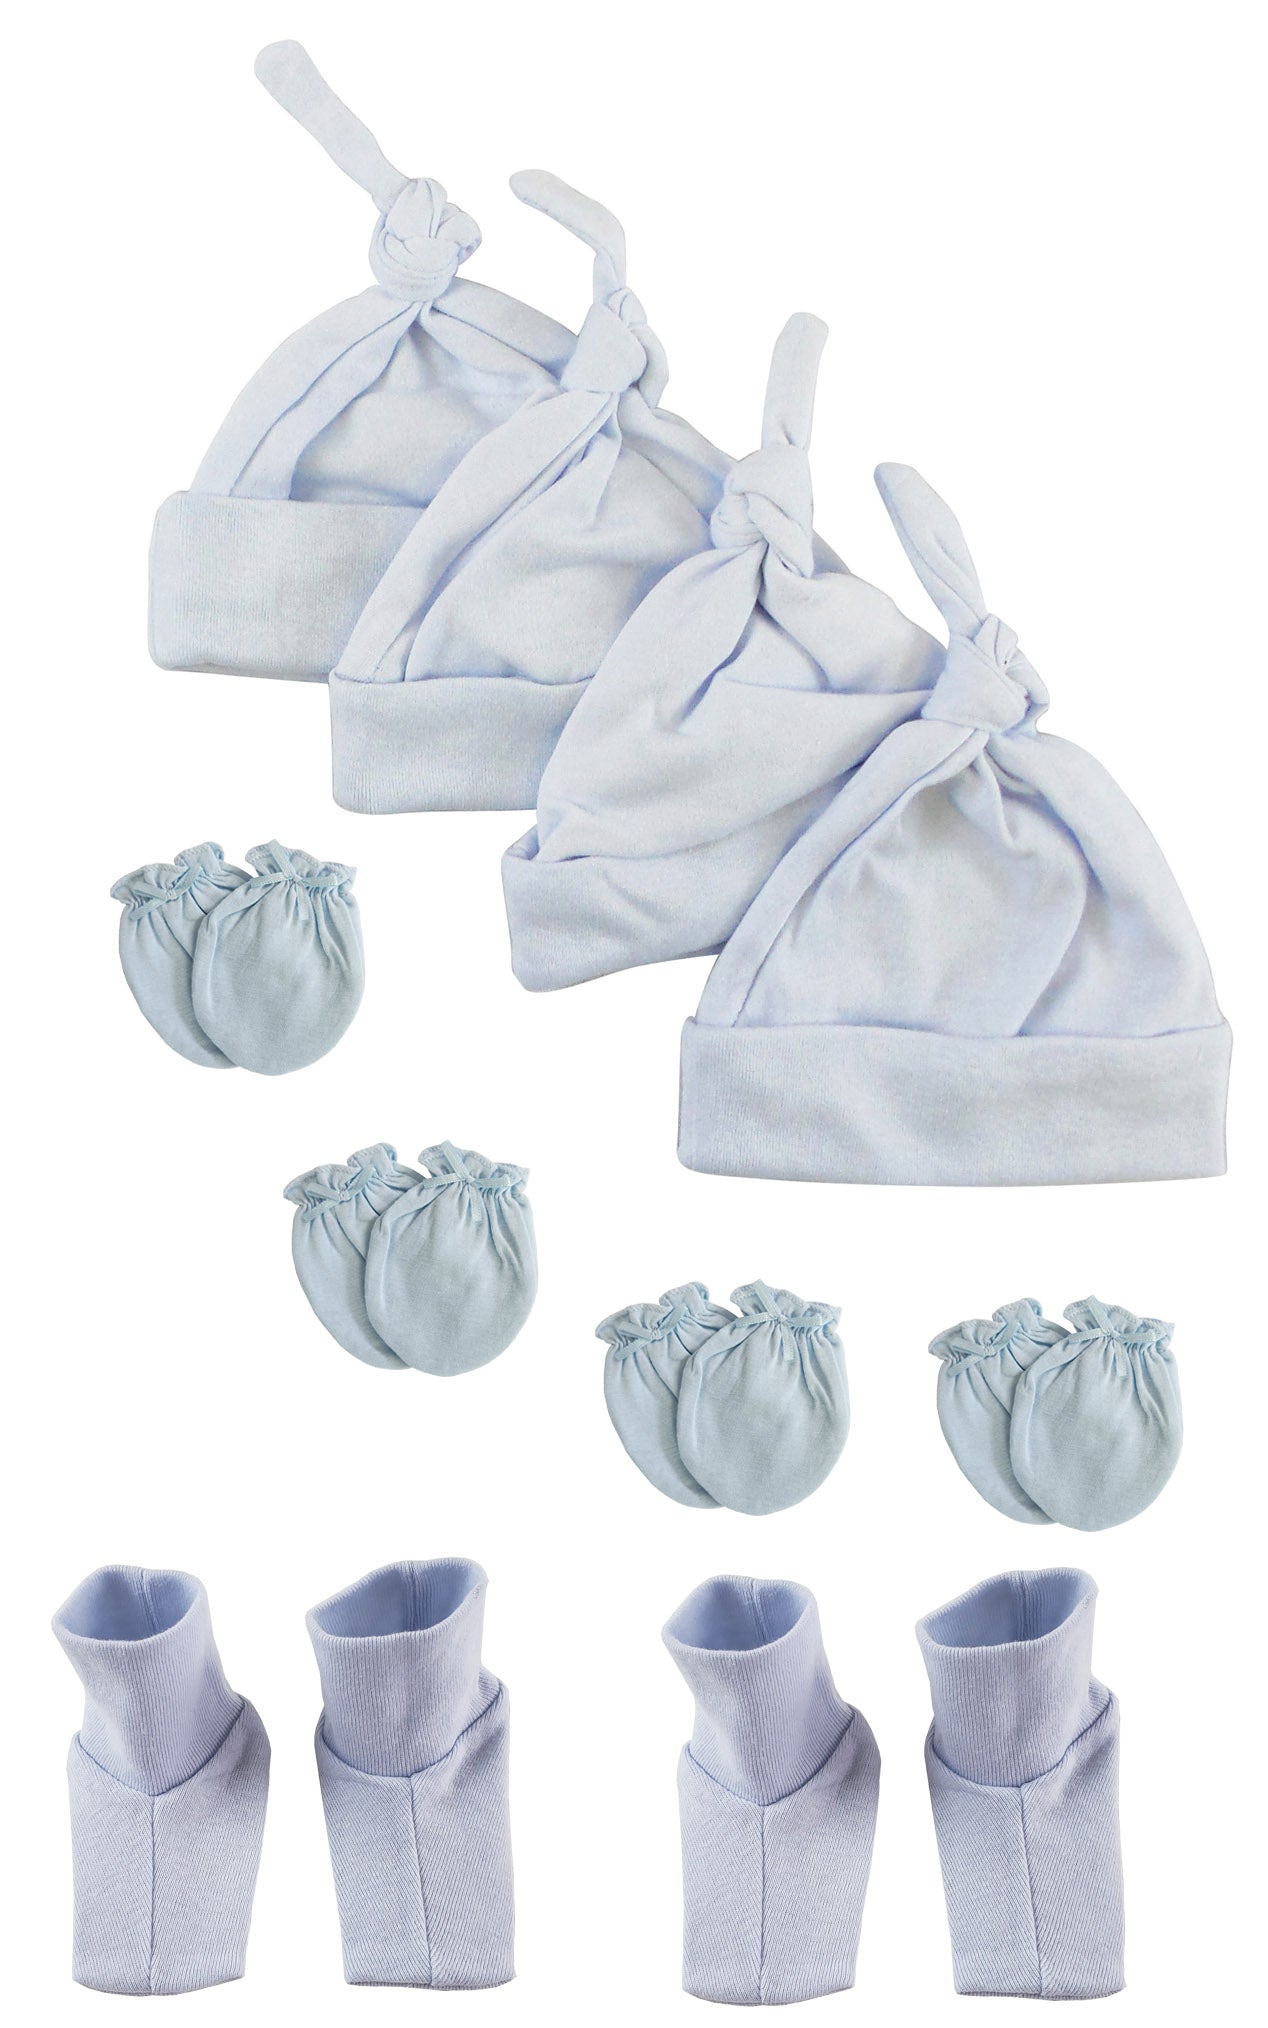 Boys Knotted Caps , Booties and Mittens - 10 Piece Set NC_0940